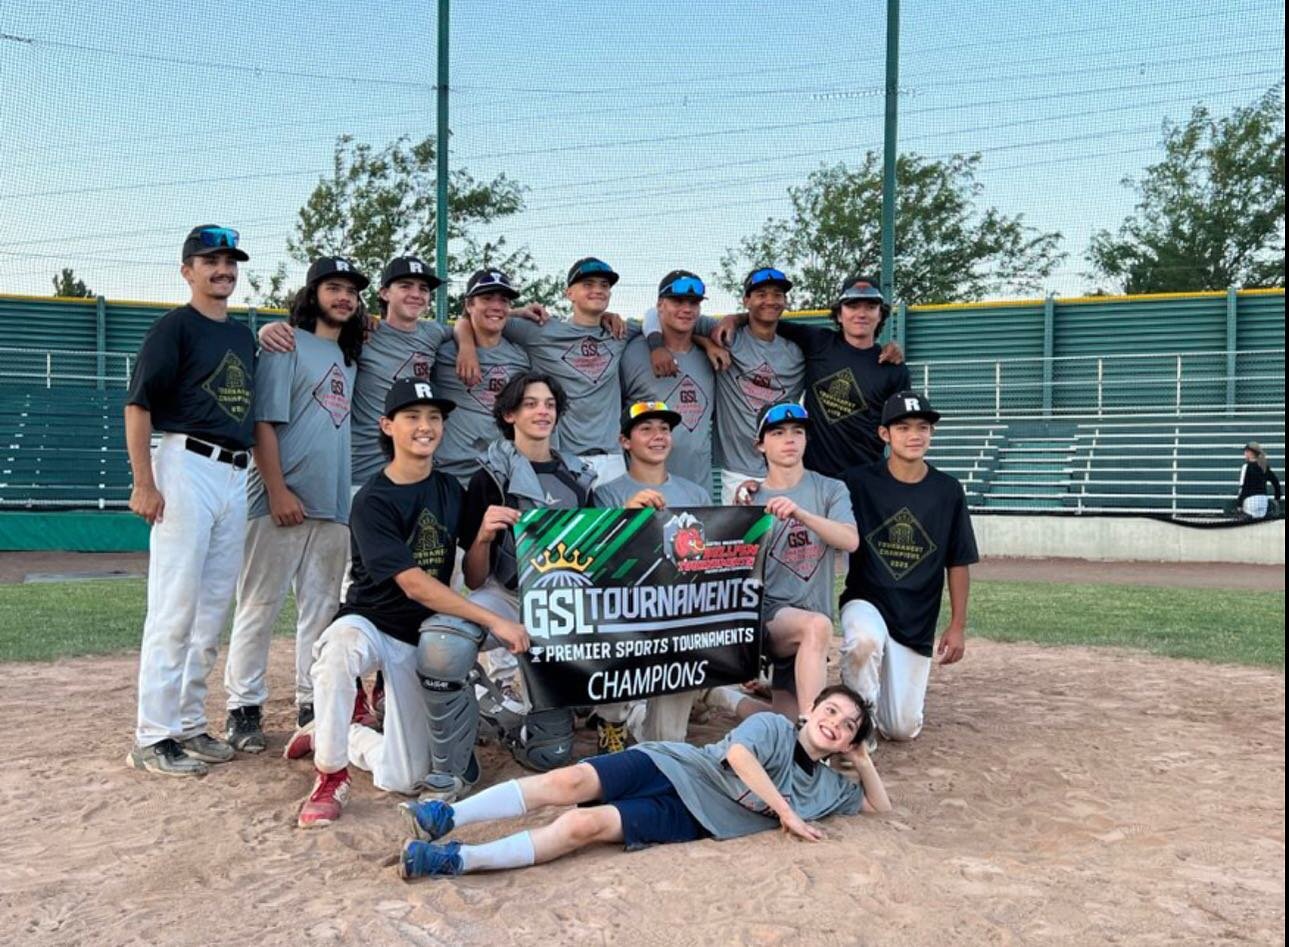 Champions! 15u finishes their season winning the @gsltournaments Bullpen Series Season Finale! 🏆

They went a perfect 4-0 on the weekend. Congrats on a great season boys! Can&rsquo;t wait for next year! 

#RIVALFAMILY